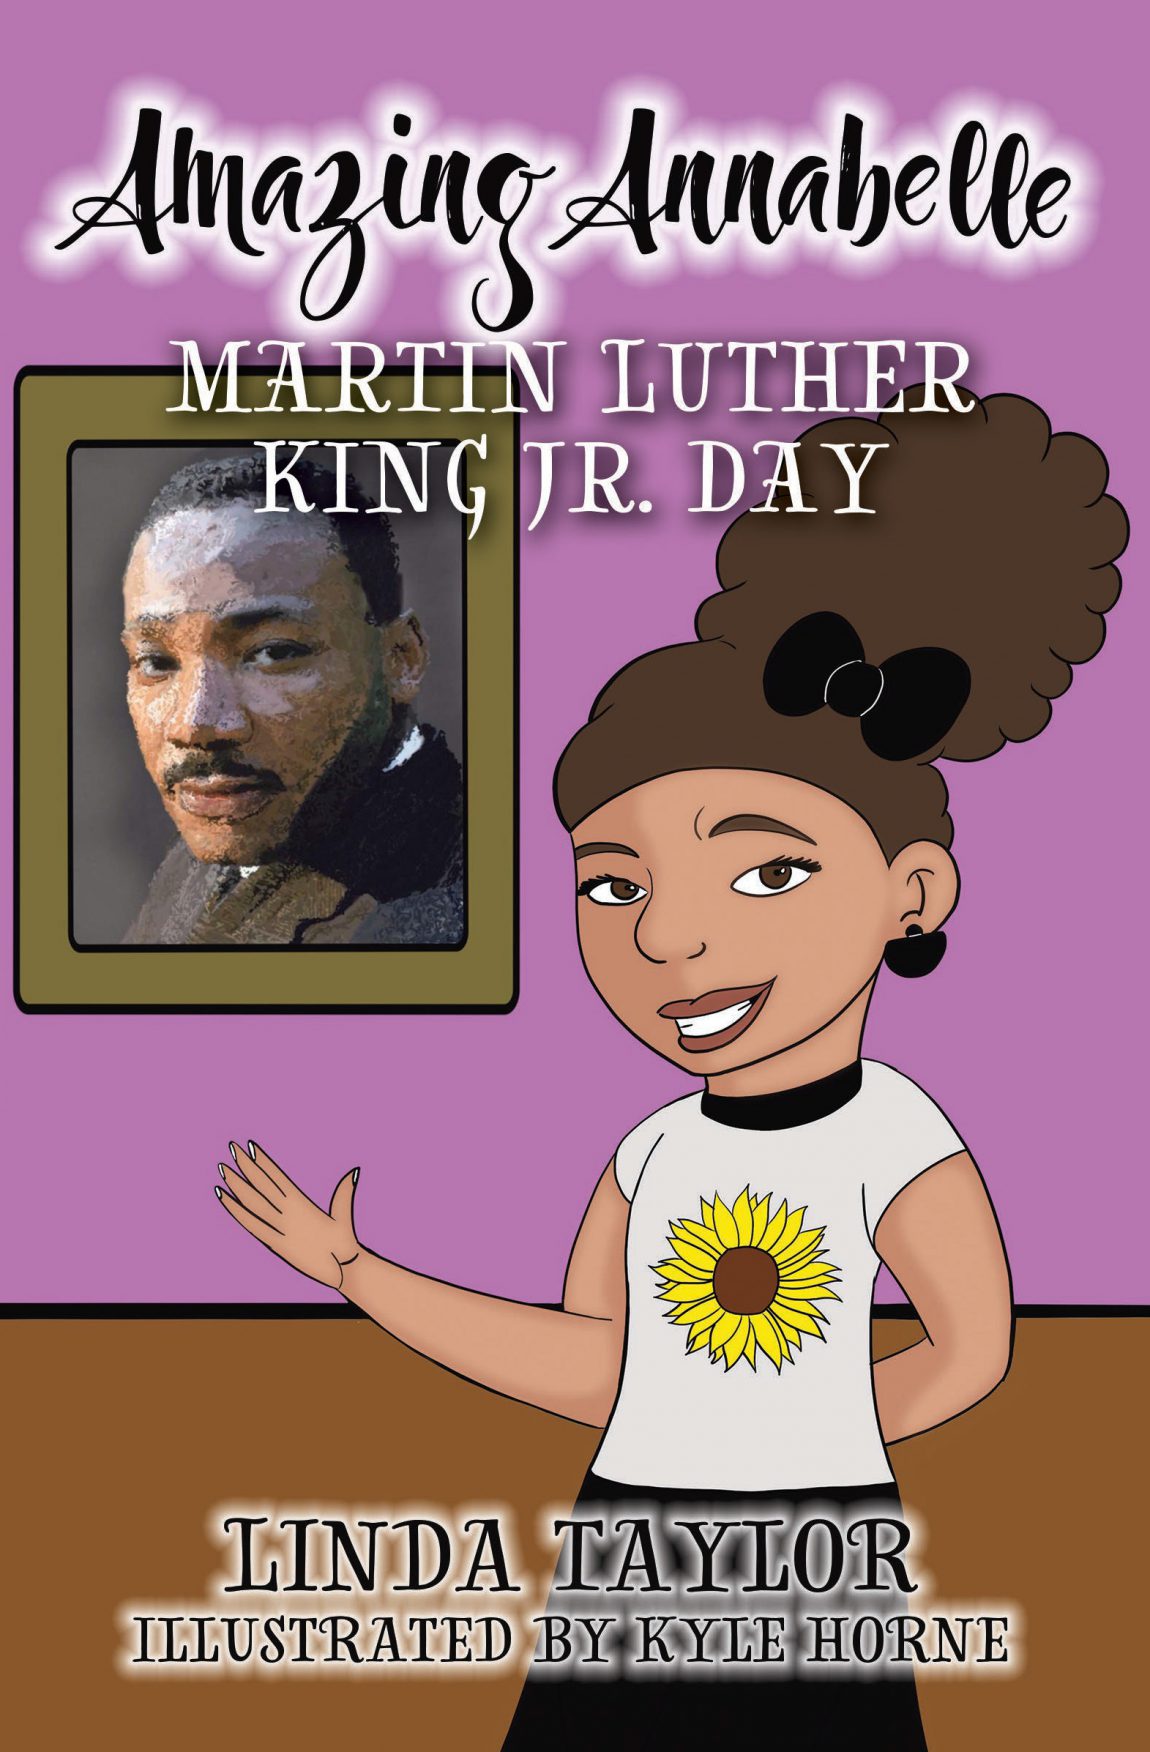 Martin-Luther-King-Jr.-Day.jpg